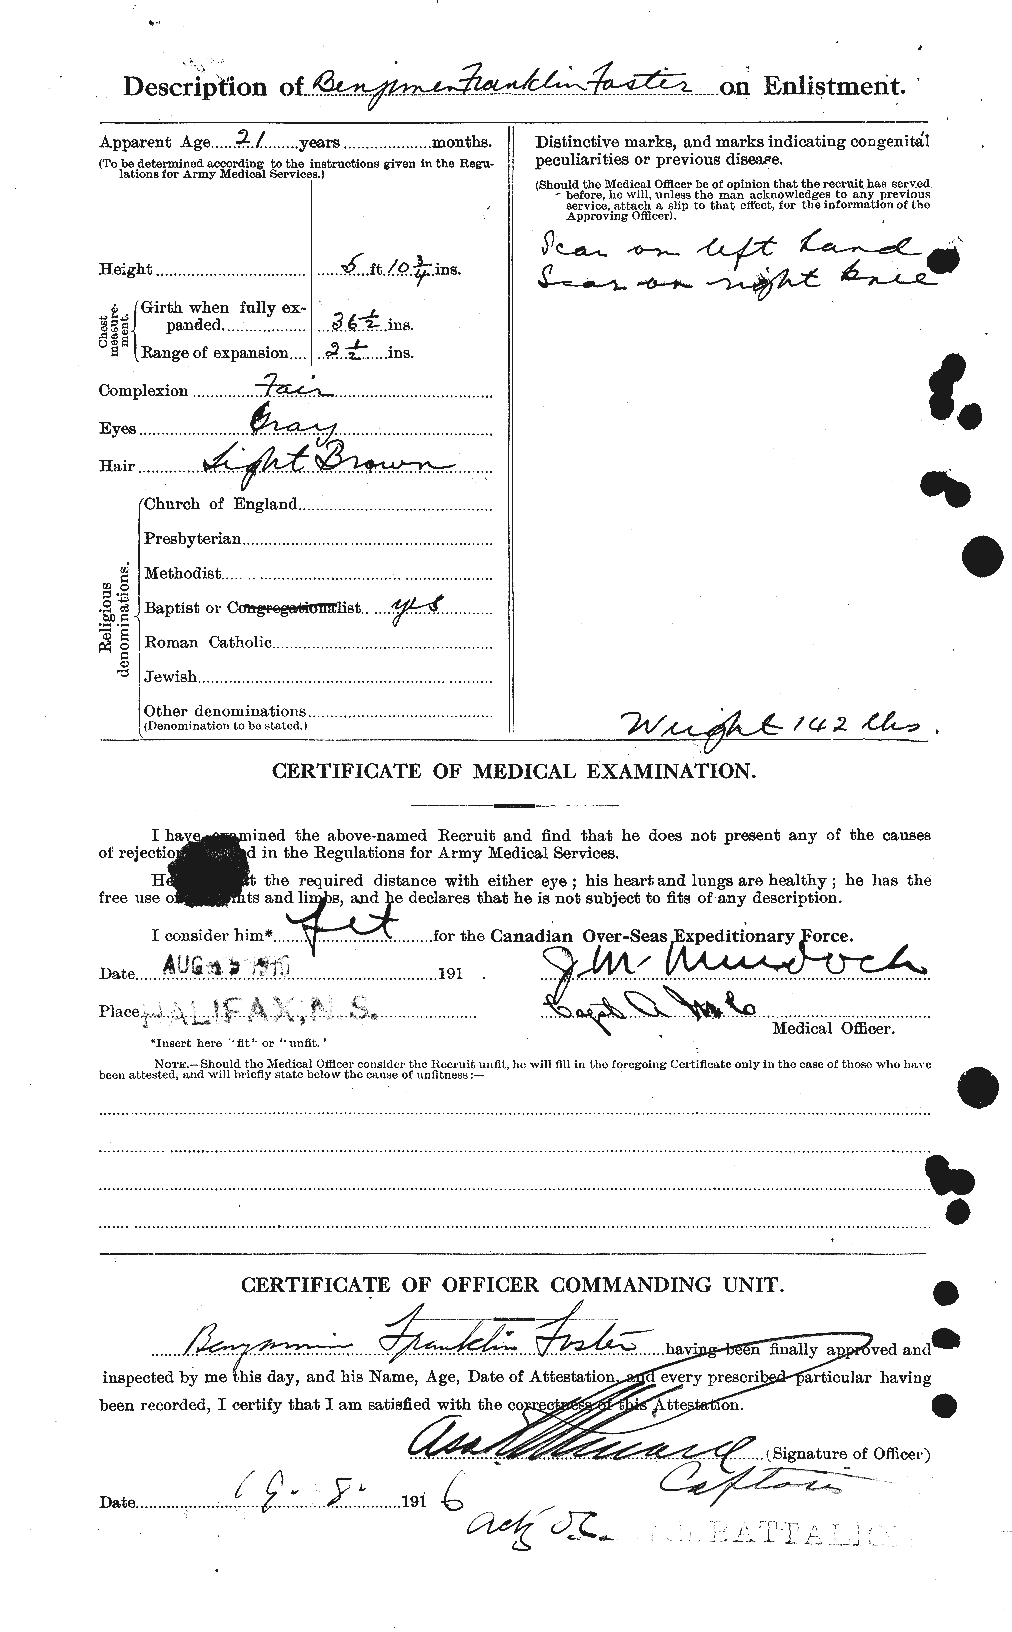 Personnel Records of the First World War - CEF 330484b